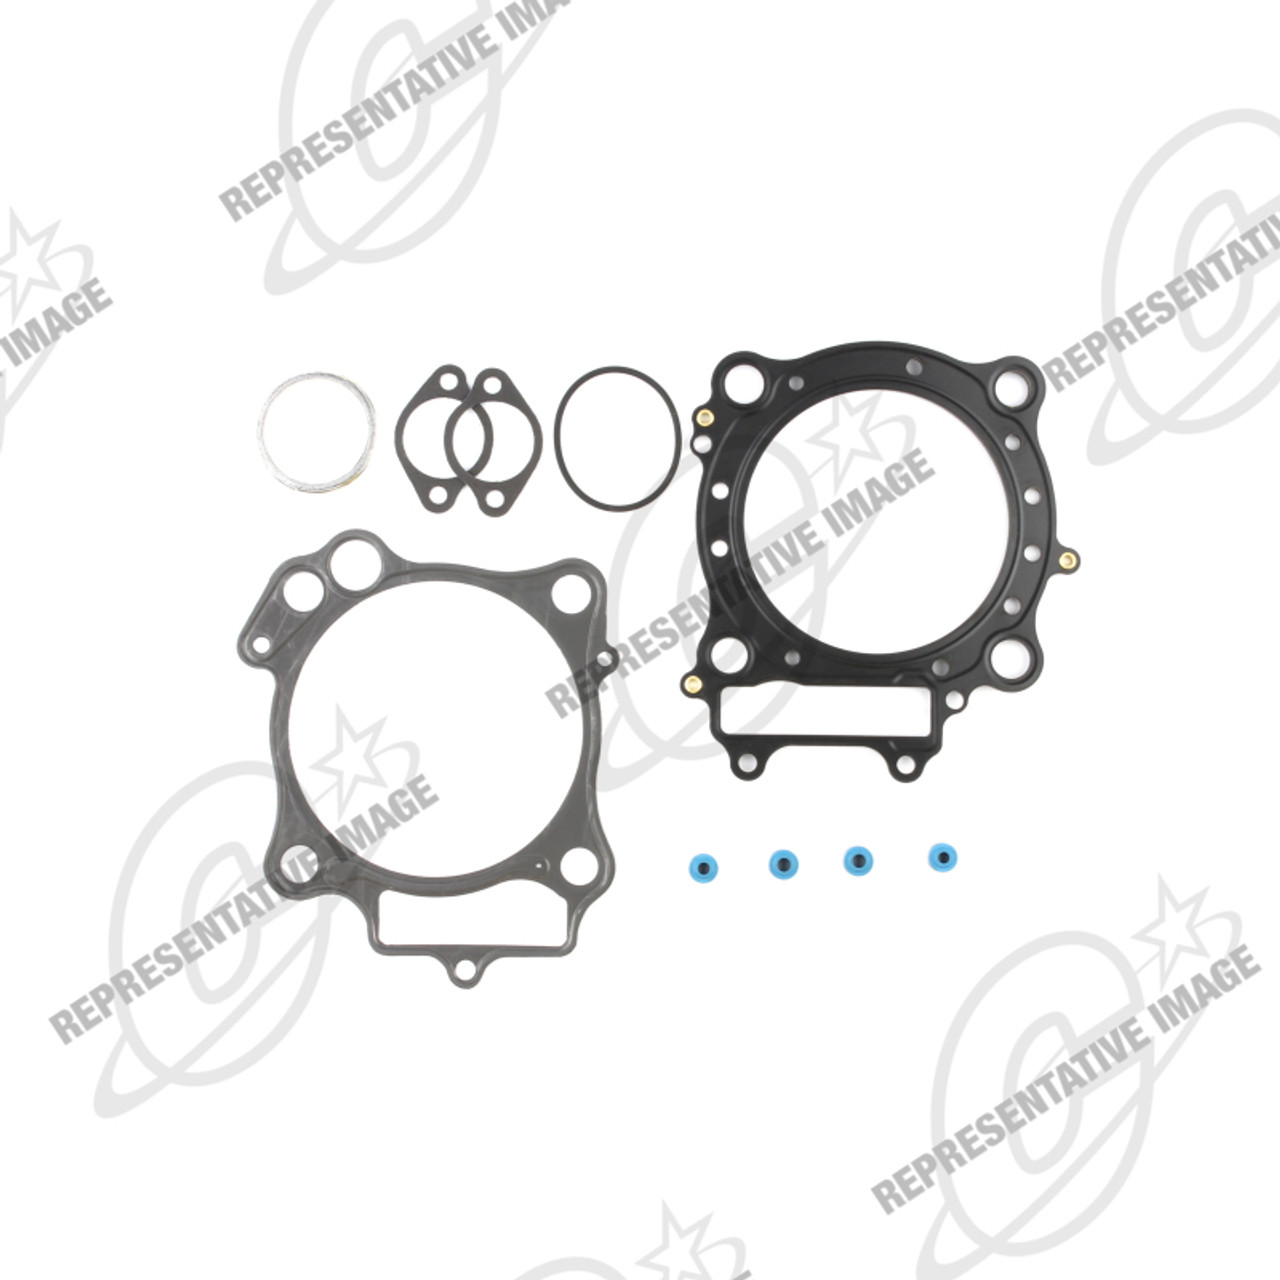 Cometic 01-13 Yamaha YZ250F Clutch & Mag Gasket Kit - C3057CM Photo - Primary